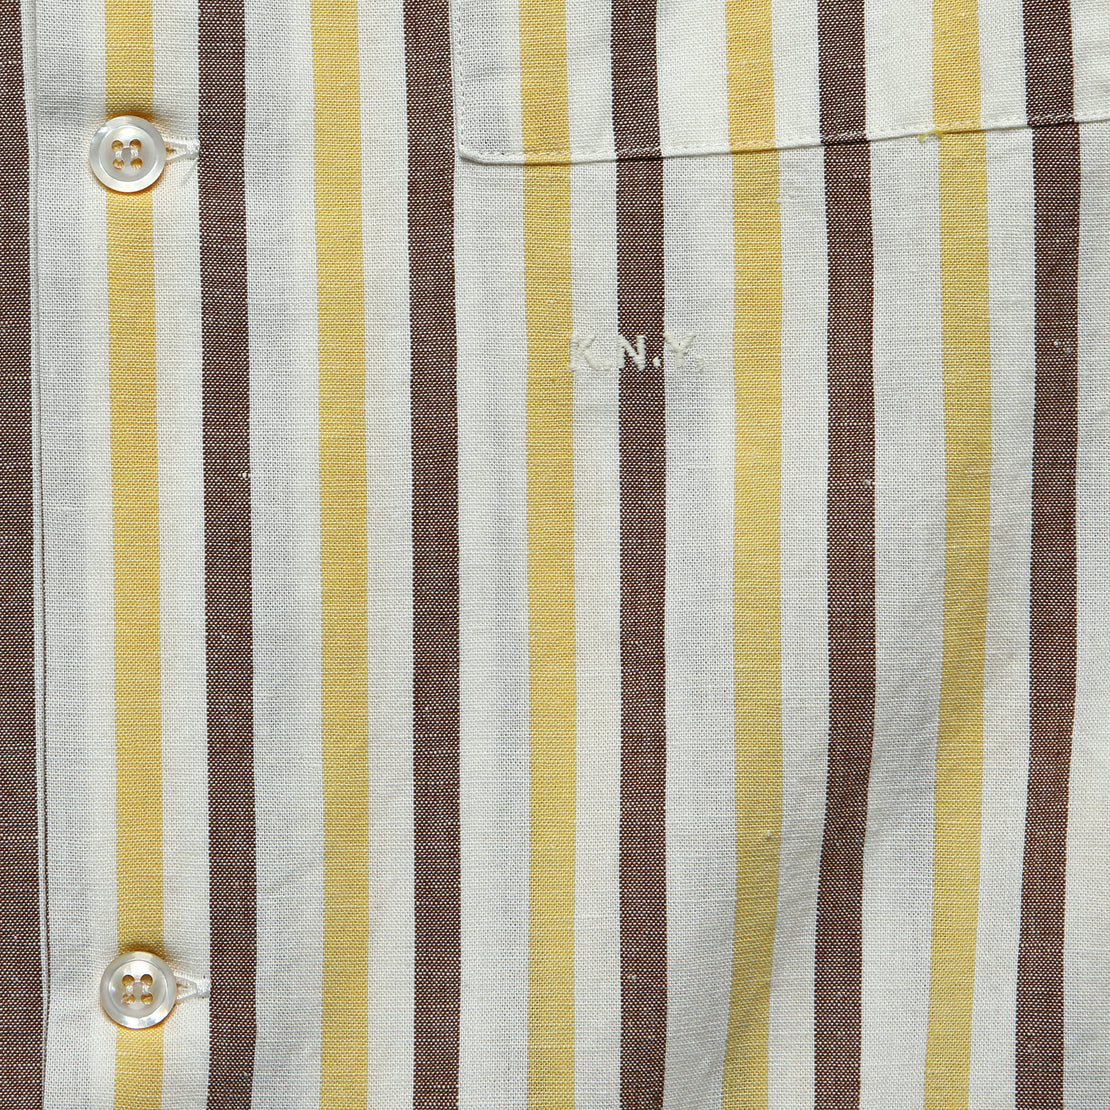 Highway Shirt - White/Brown/Yellow - Knickerbocker - STAG Provisions - Tops - S/S Woven - Stripe